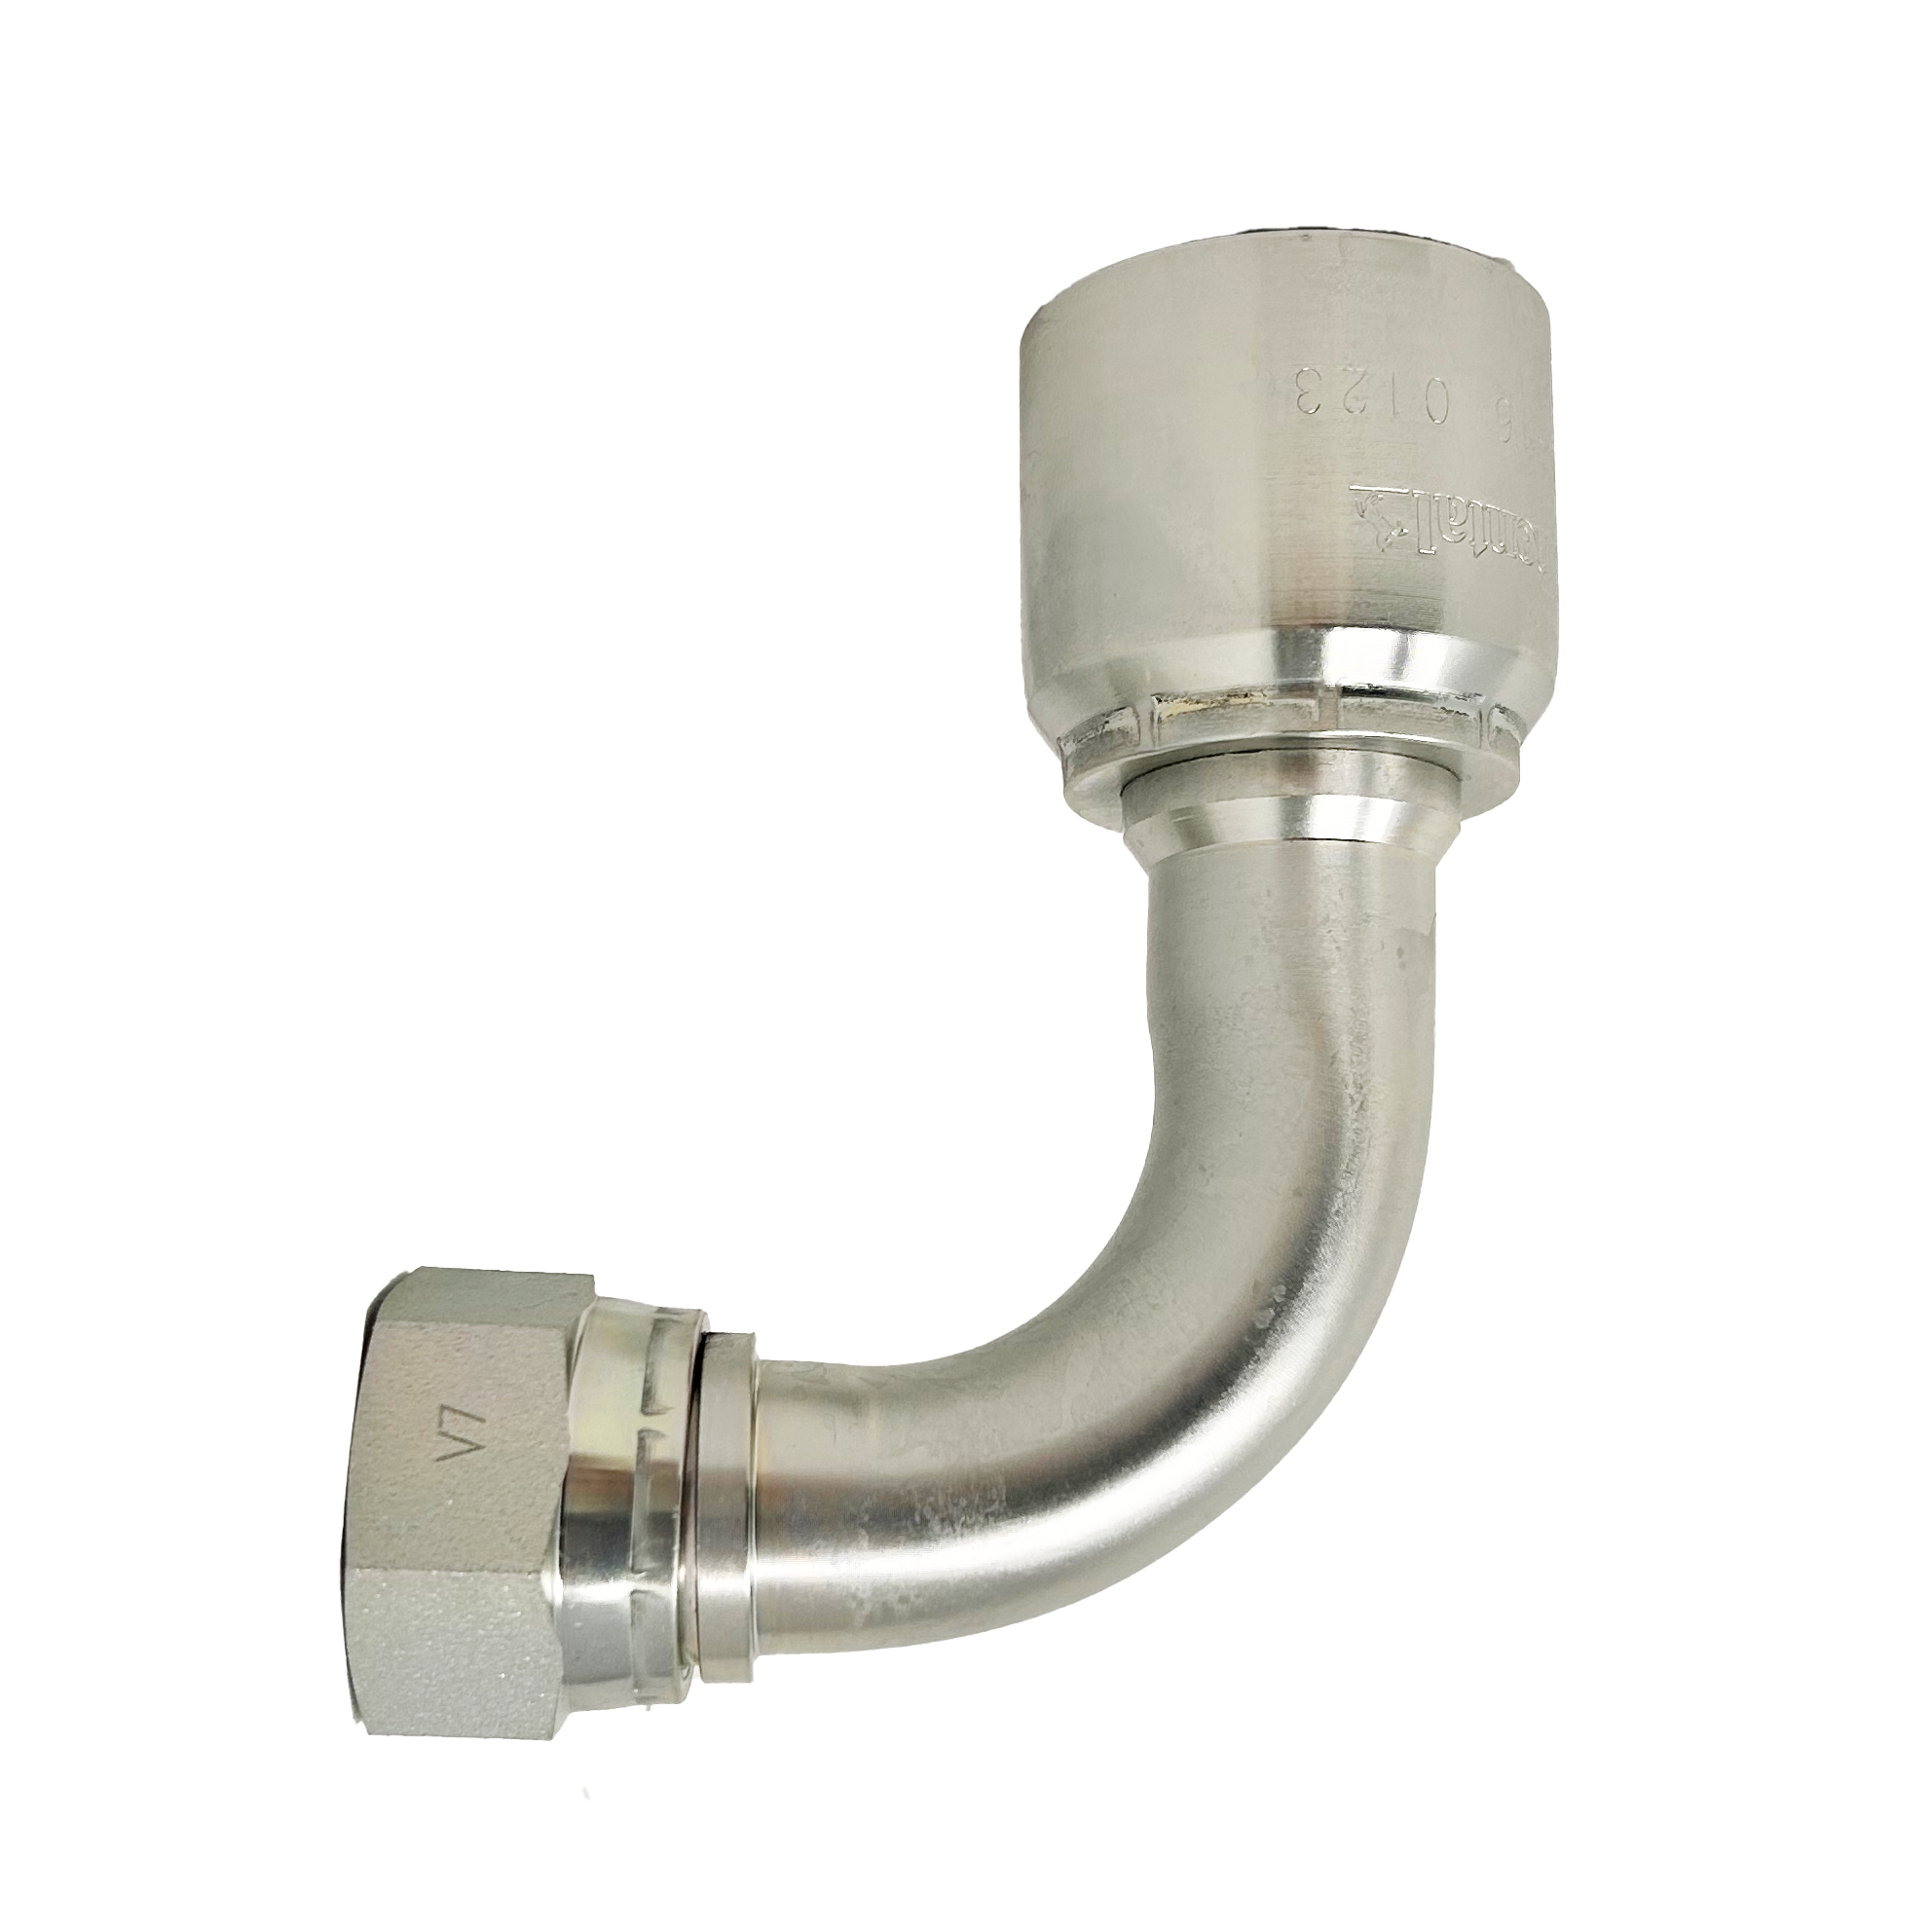 B2-JCFX90-0505: Continental Hose Fitting, 0.3125 (5/16") Hose ID x 1/2-20 Female JIC, 90-Degree Swivel Connection